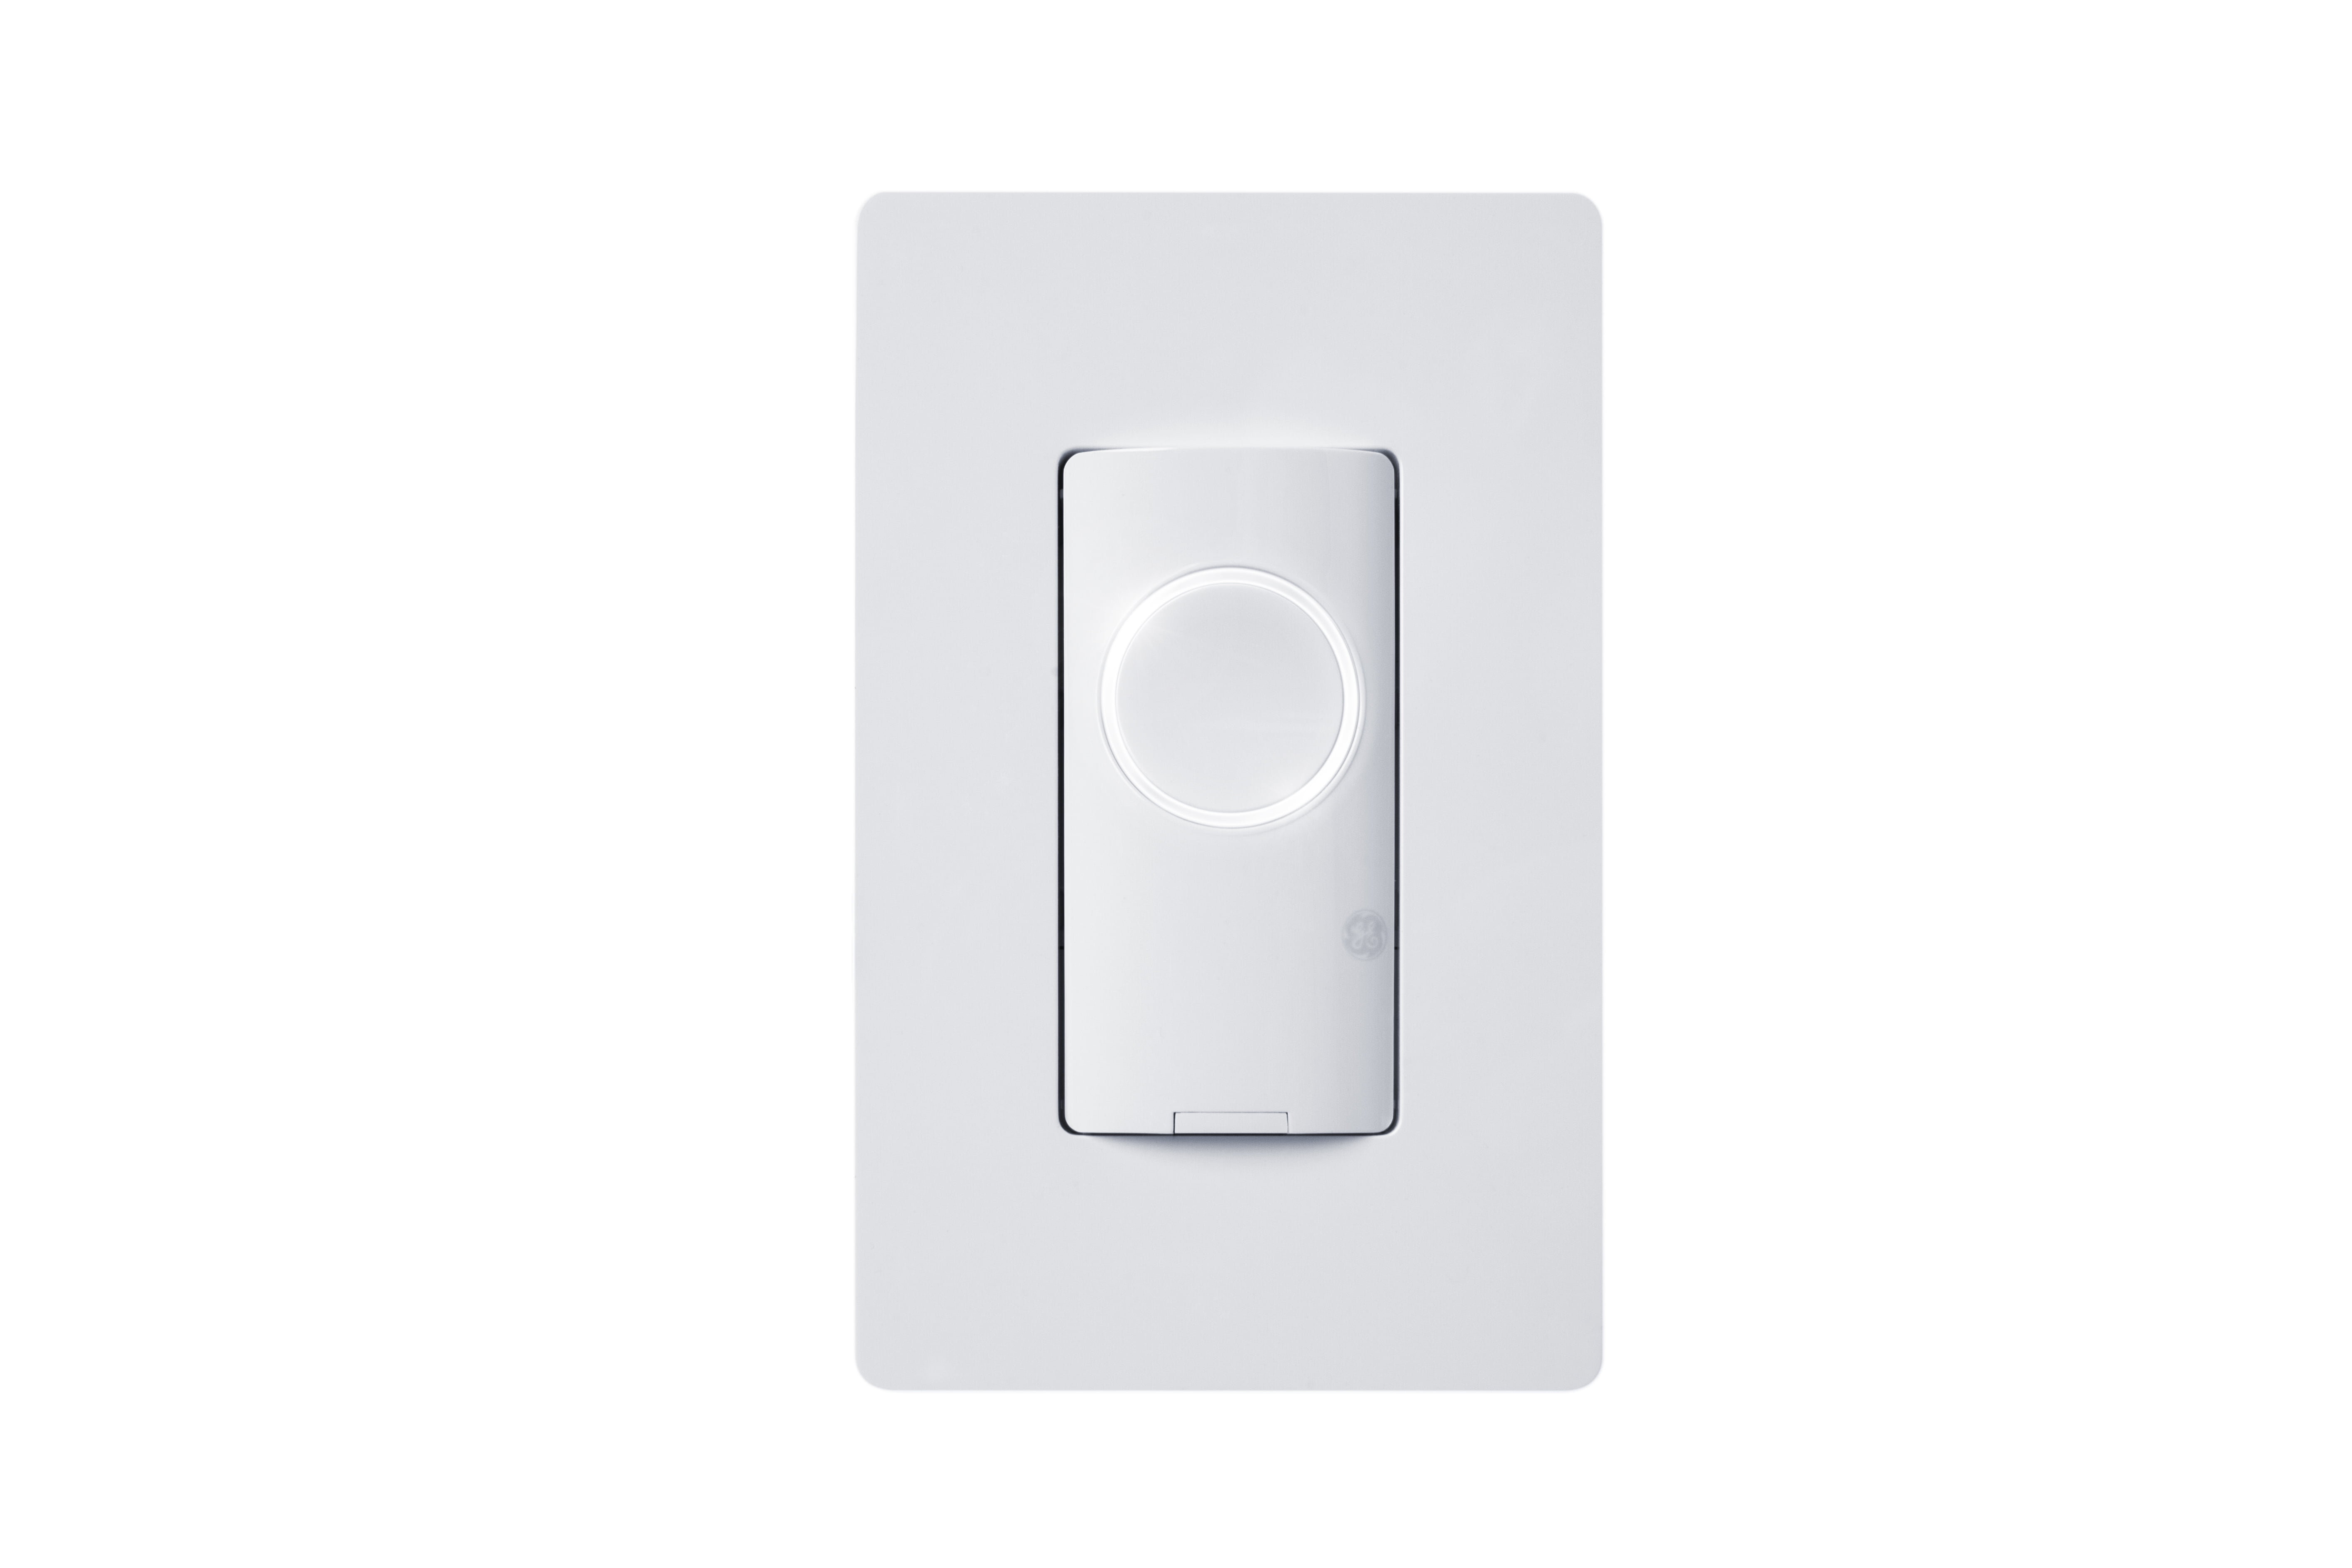 Packaging May Vary Bluetooth/Wi-Fi Light Switch Single-Pole/3-Way Smart Switch C by GE 4-Wire On/Off Button Style Smart Switch Alexa and Google Home Compatible Without Hub 1-Pack 